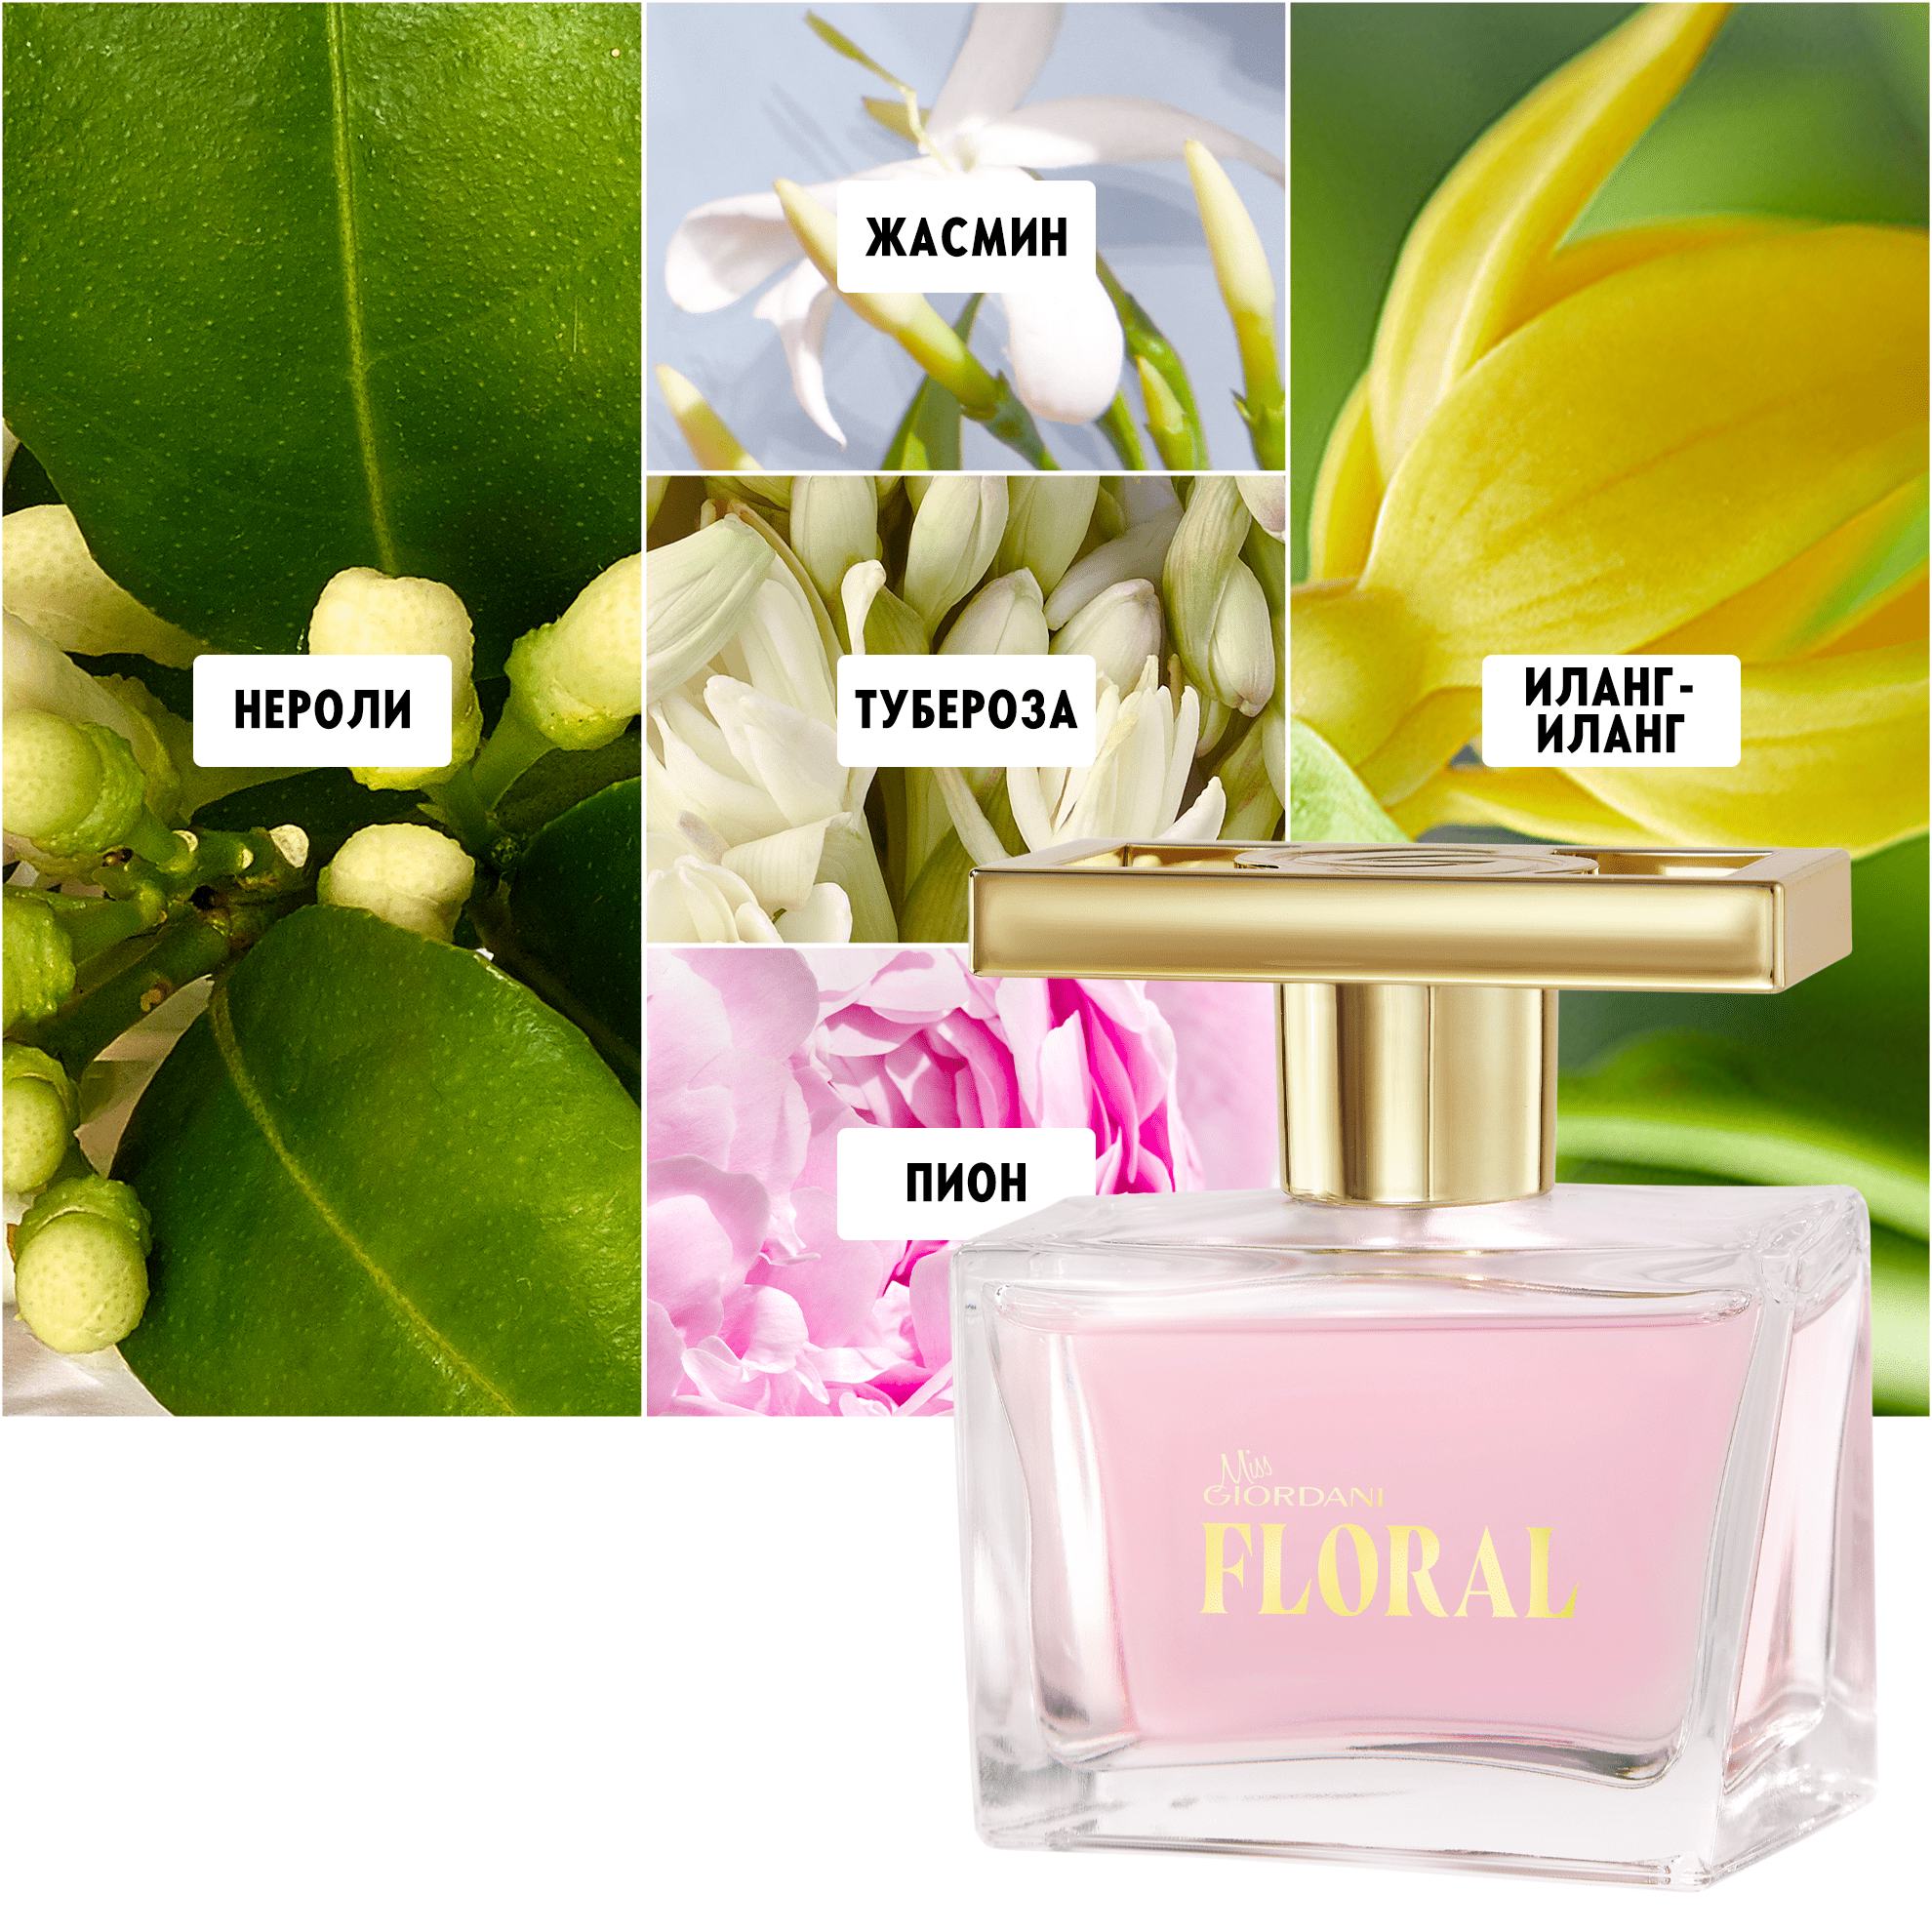 https://media-cdn.oriflame.com/productImage?externalMediaId=product-management-media%2fProducts%2f46718%2fRU%2f46718_6.png&id=19003796&version=3